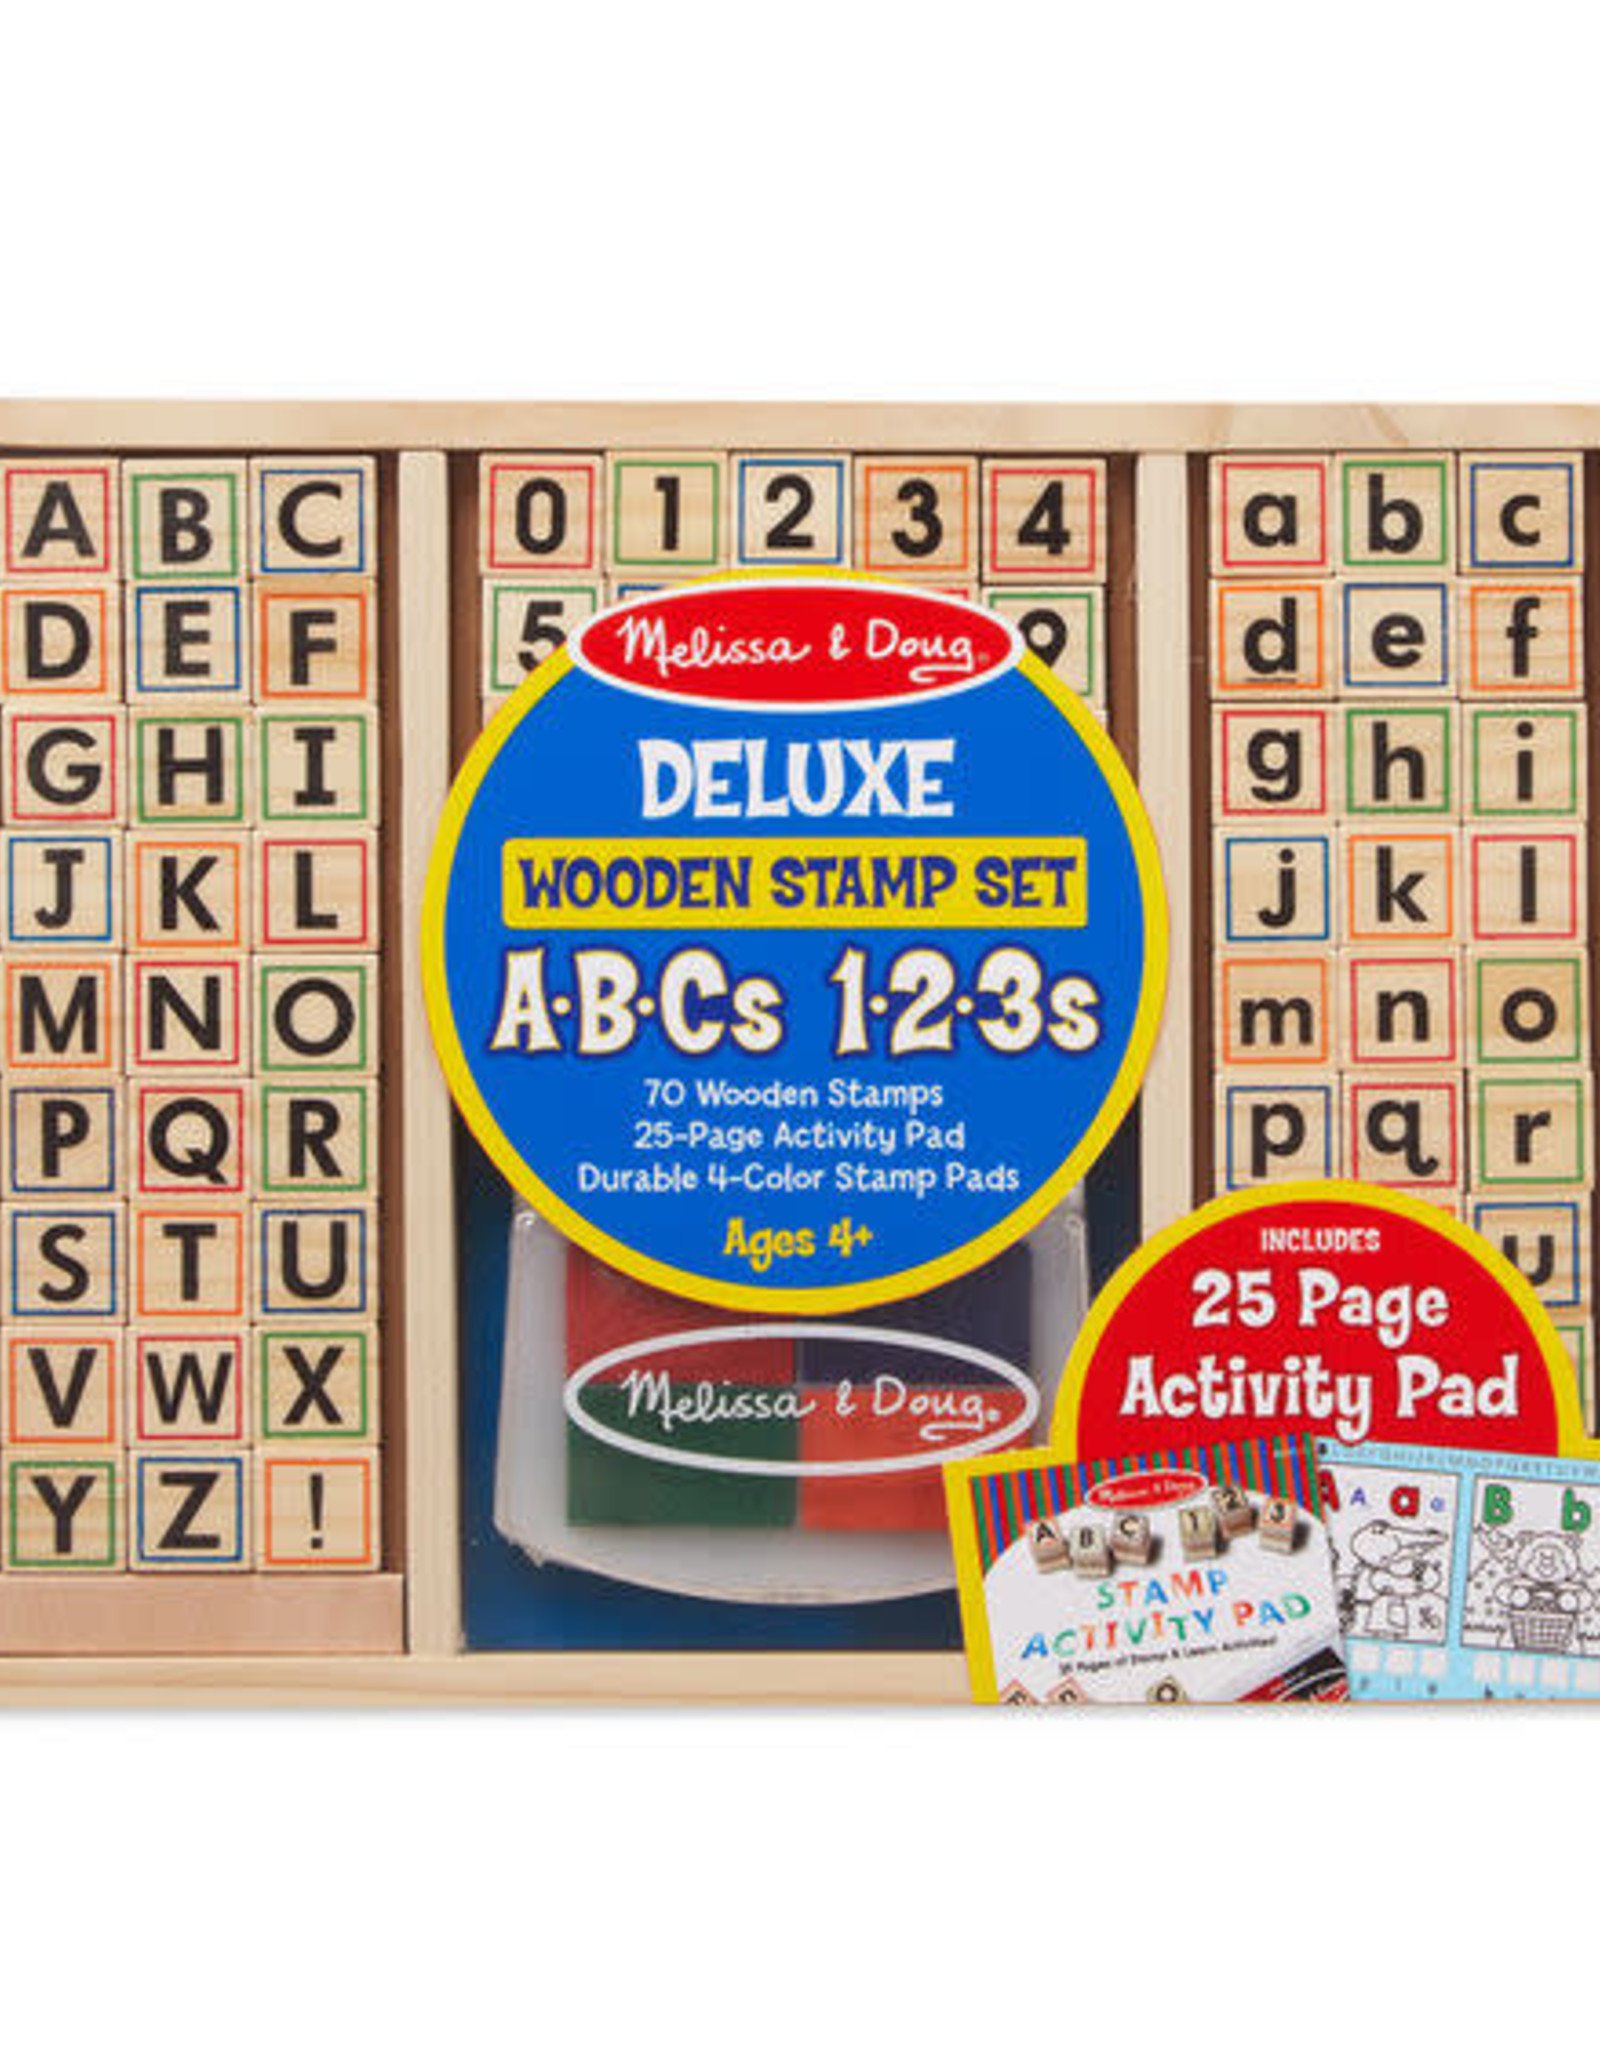 ABCs & 123s Deluxe Wooden Stamp Set